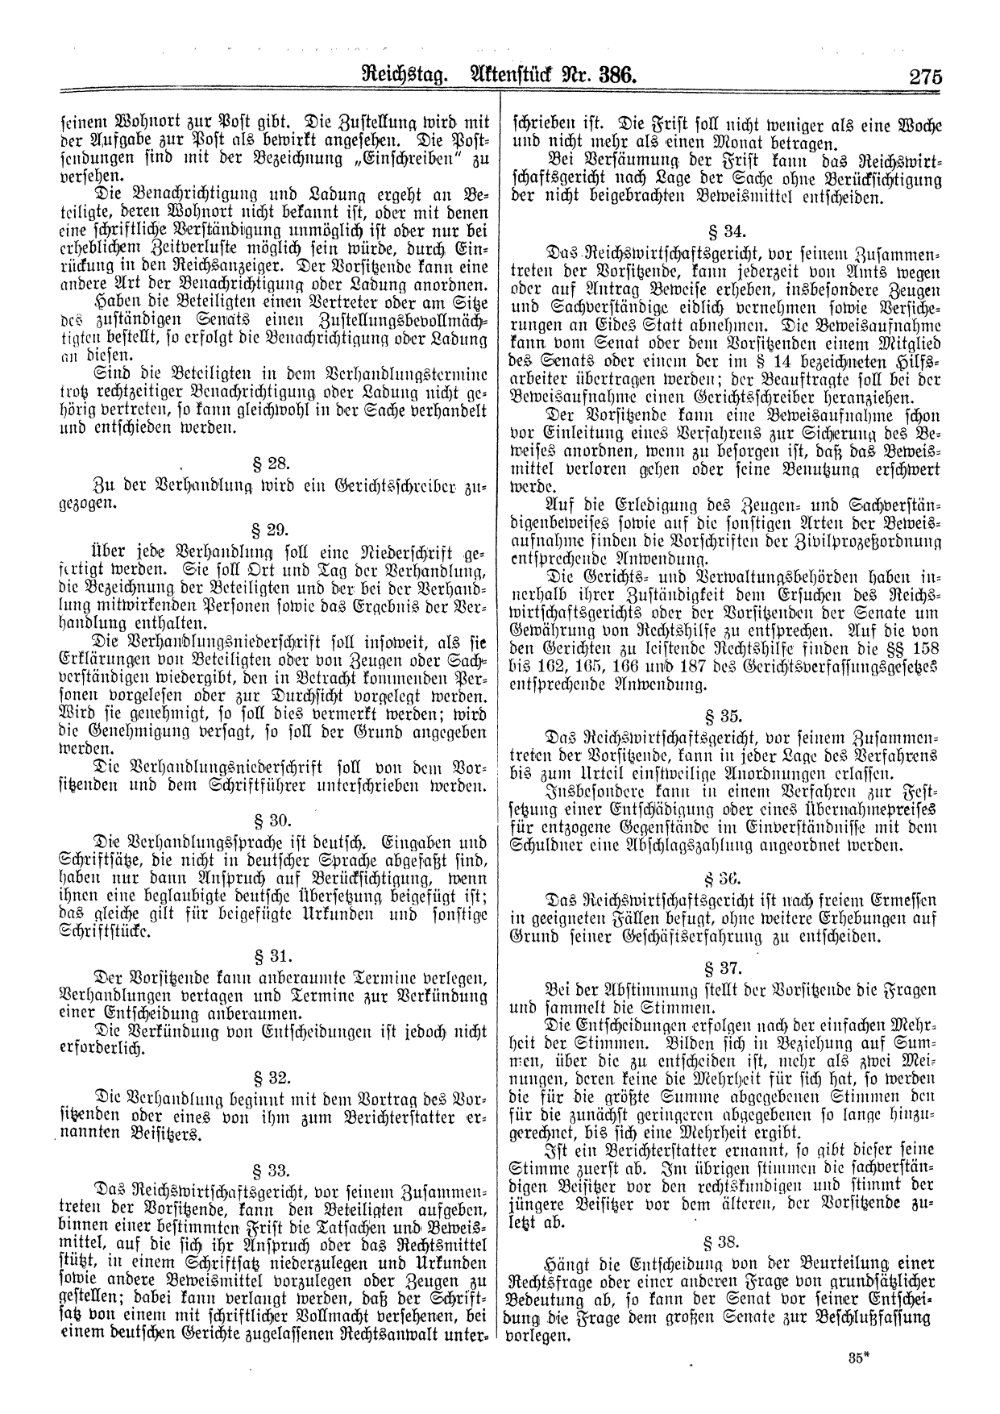 Scan of page 275